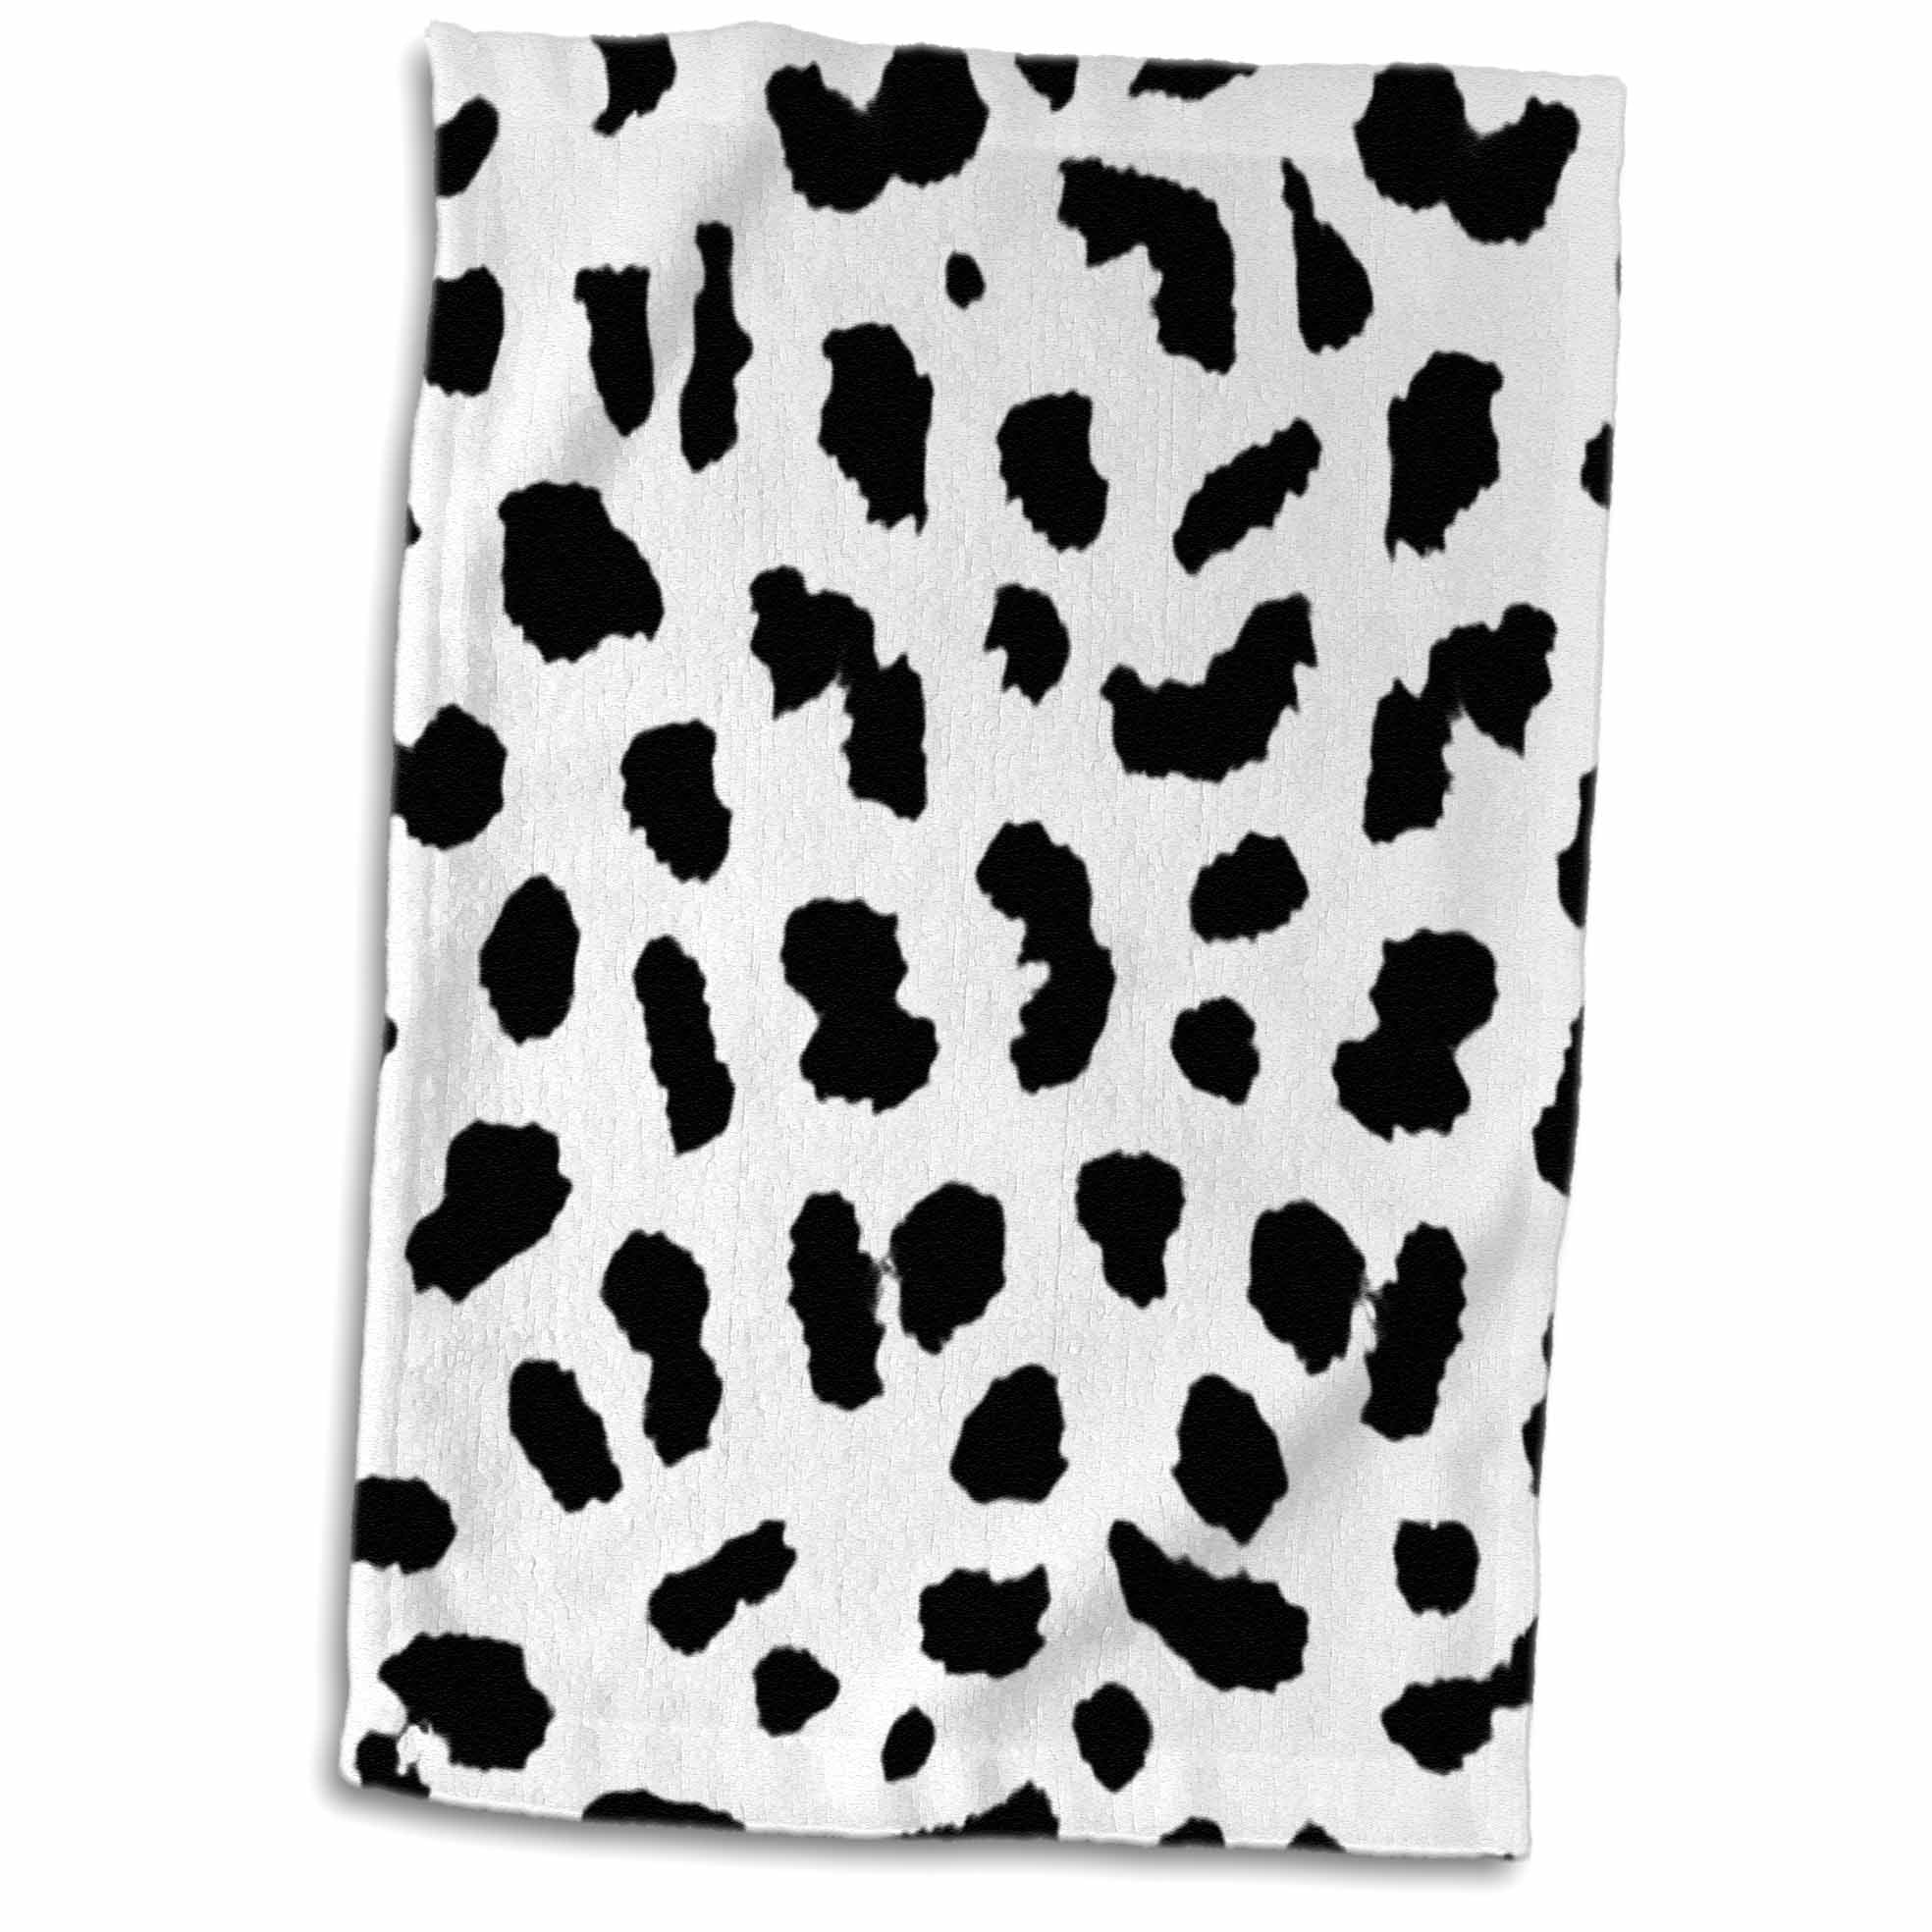 3dRose Black and White Leopard Print - Towel, 15 by 22-inch 